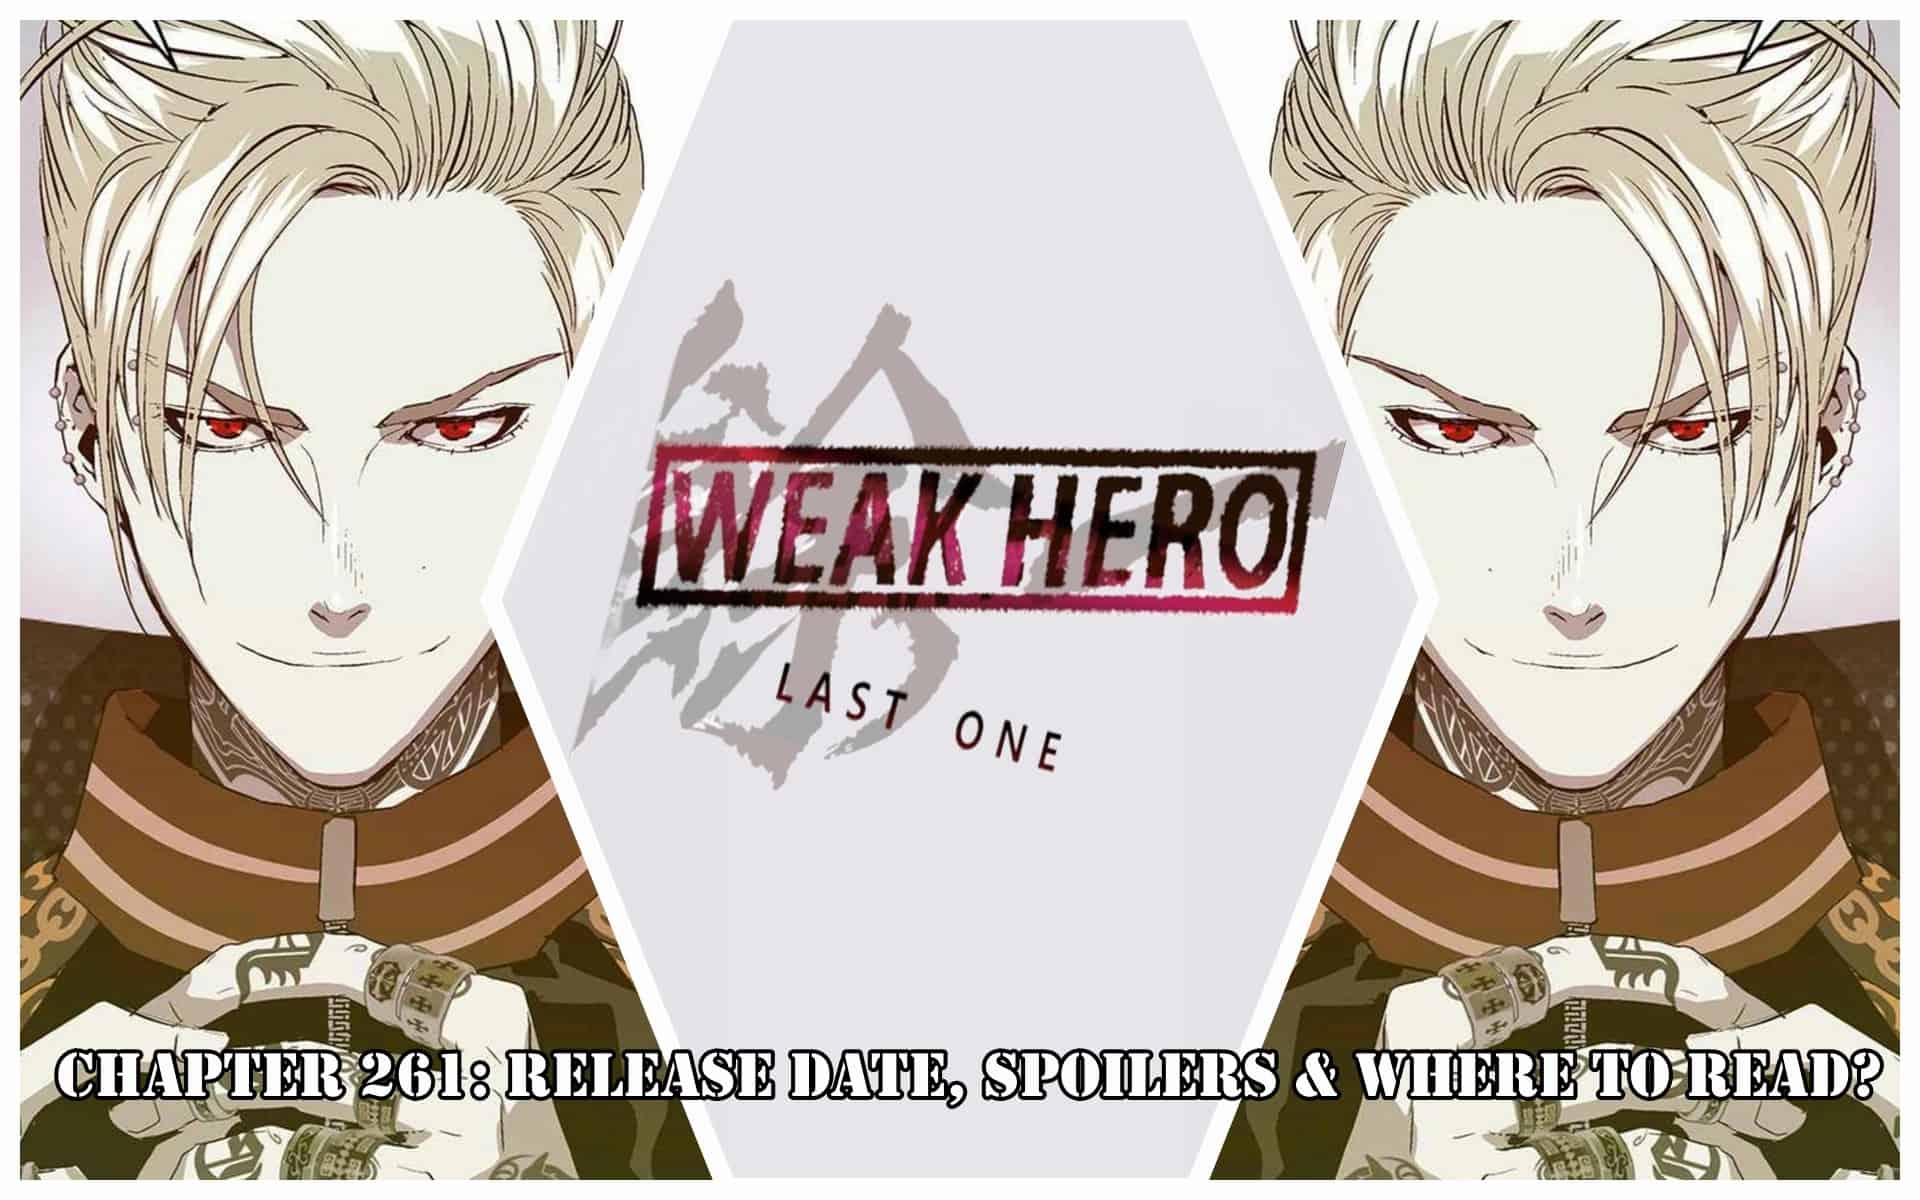 Weak Hero Chapter 261: Release Date, Spoilers & Where to Read?